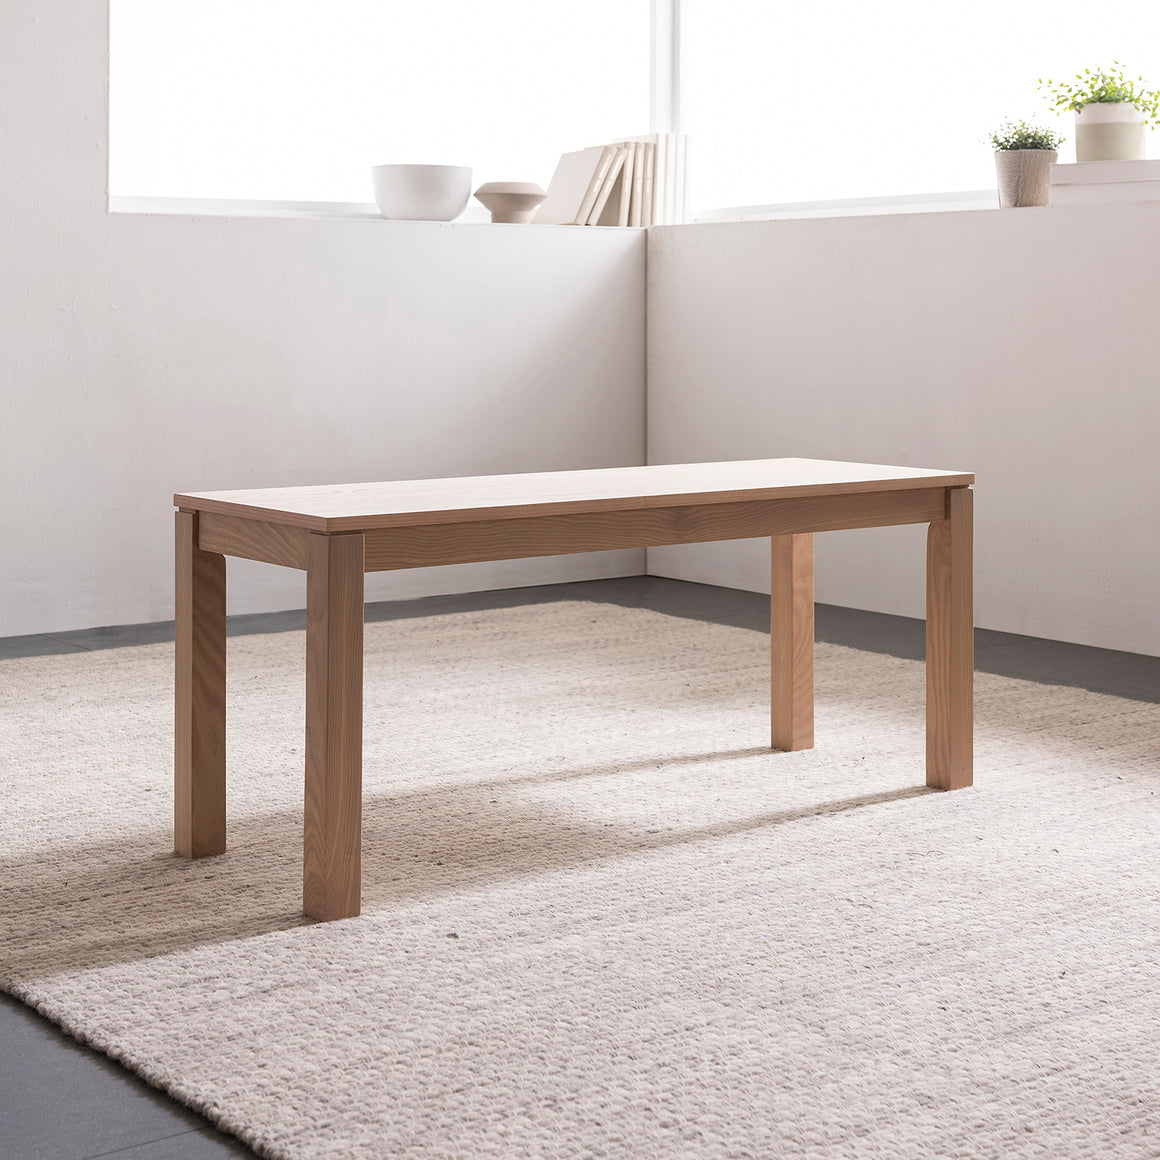 New Vincent Bench (accept pre-order)